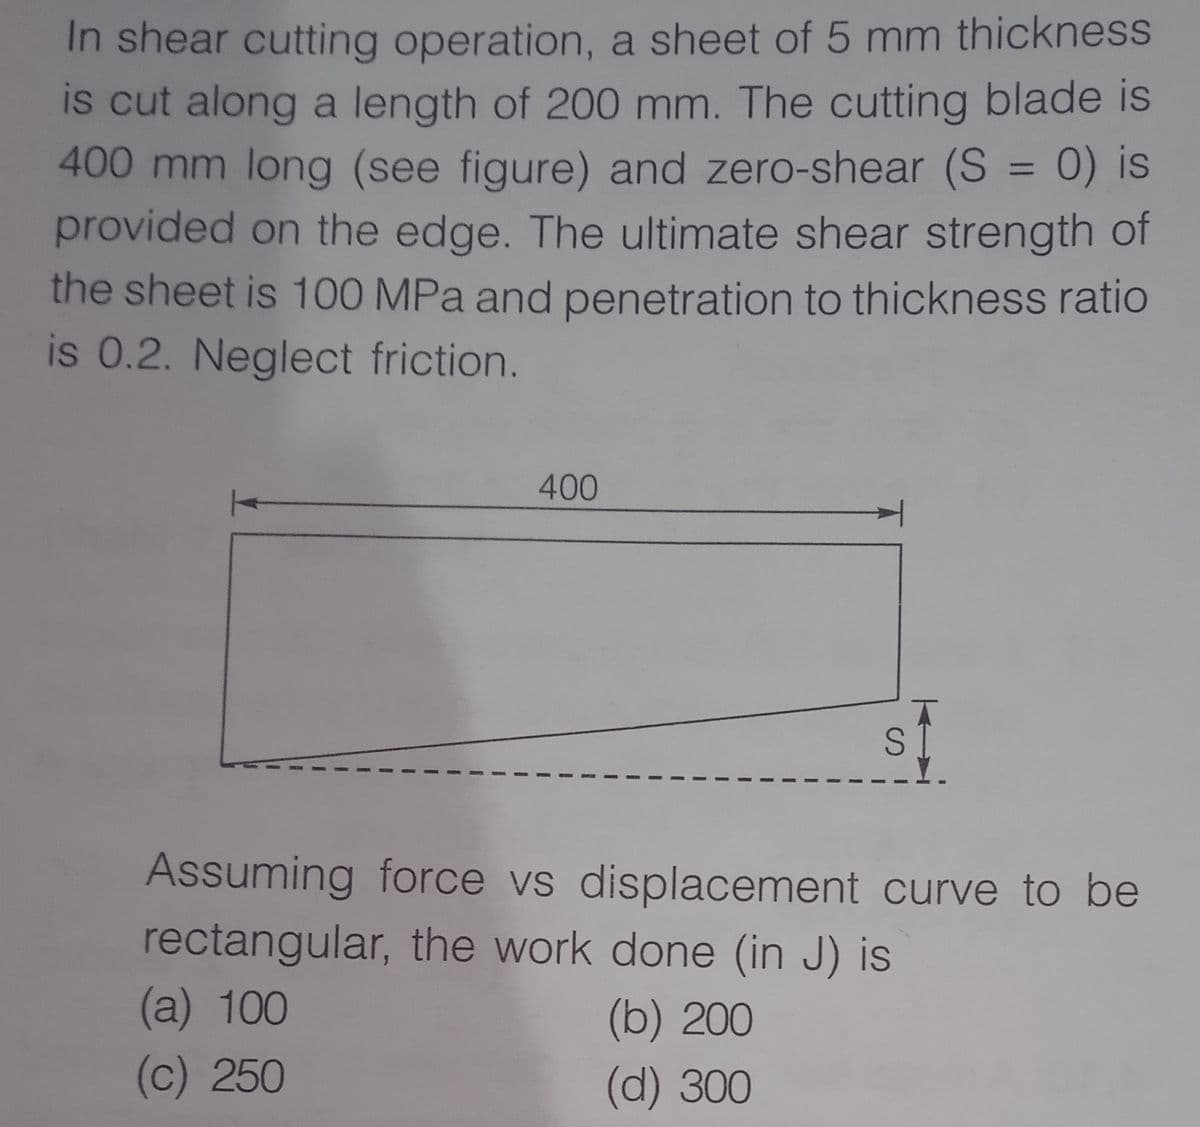 In shear cutting operation, a sheet of 5 mm thickness
is cut along a length of 200 mm. The cutting blade is
400 mm long (see figure) and zero-shear (S = 0) is
provided on the edge. The ultimate shear strength of
the sheet is 100 MPa and penetration to thickness ratio
is 0.2. Neglect friction.
%3D
400
S 1
Assuming force vs displacement curve to be
rectangular, the work done (in J) is
(a) 100
(b) 200
(c) 250
(d) 300
